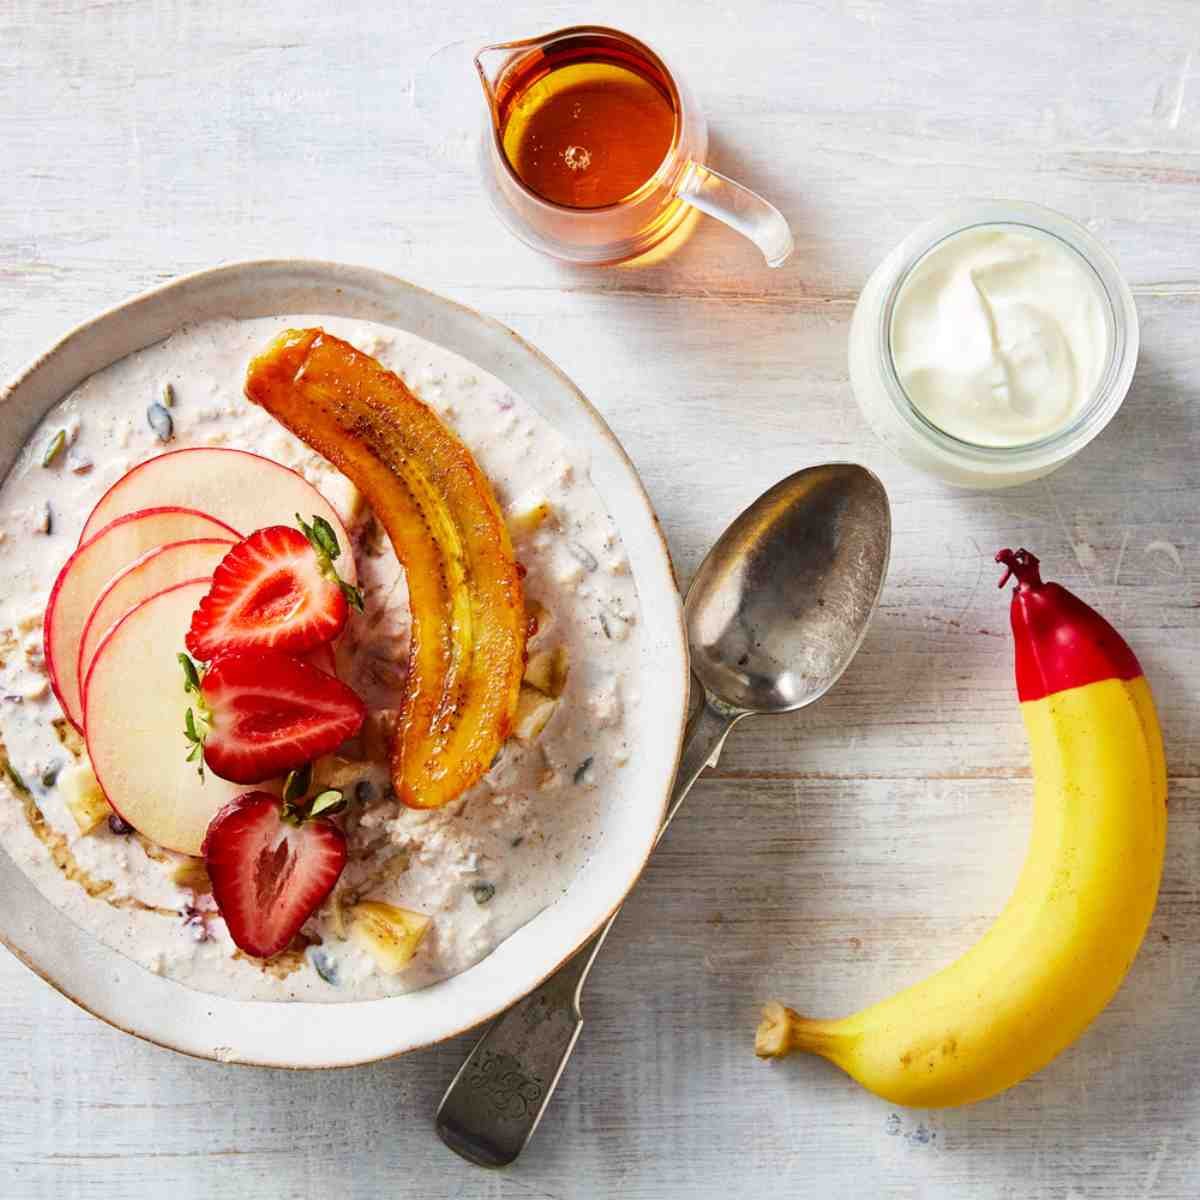 A bowl of oatmeal topped with apples, strawberries and bananas.